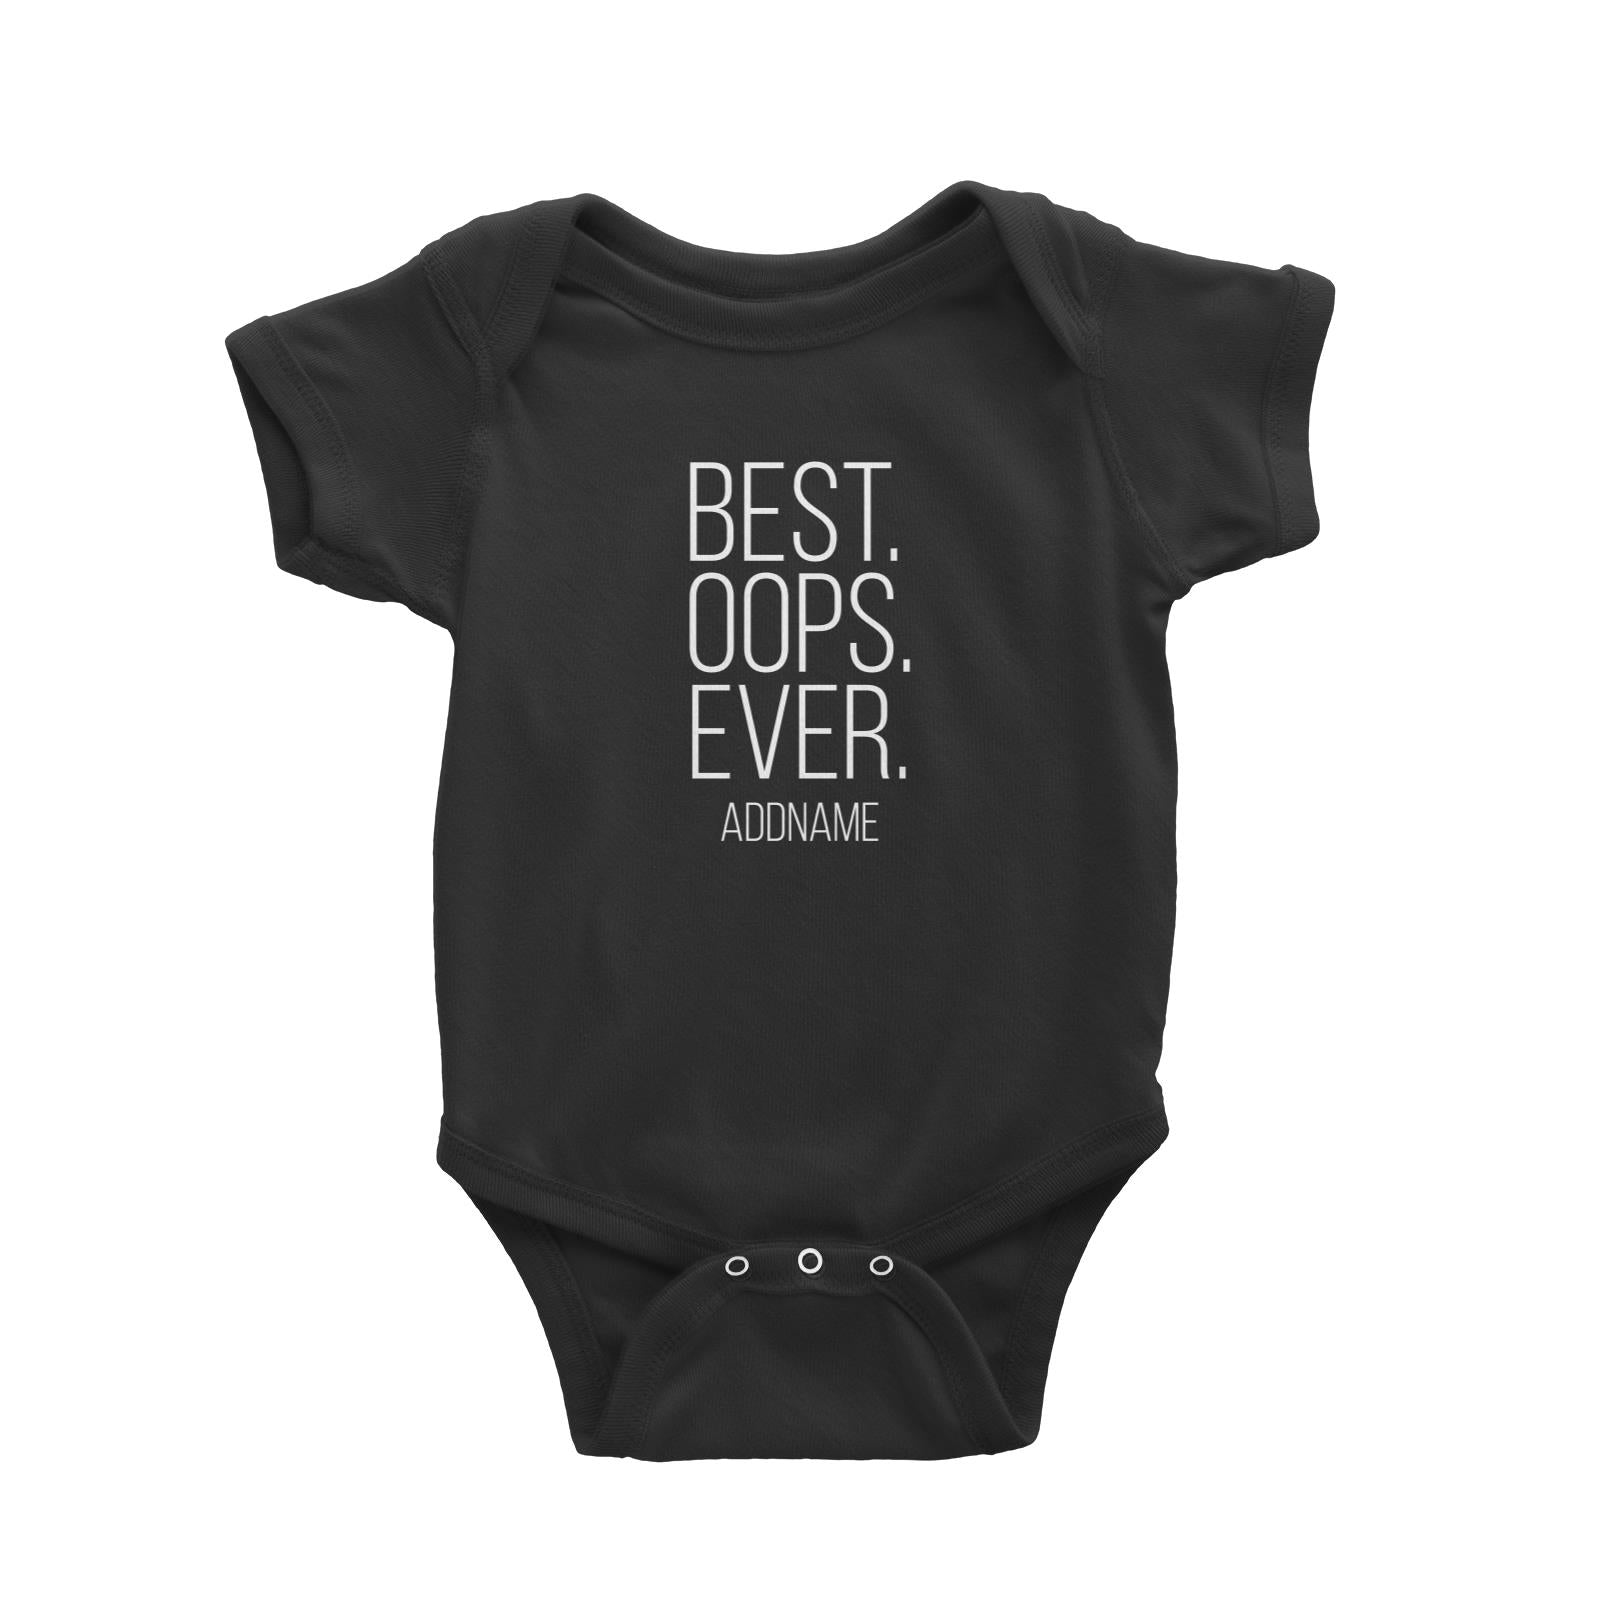 Best Oops Ever Addname Baby Romper